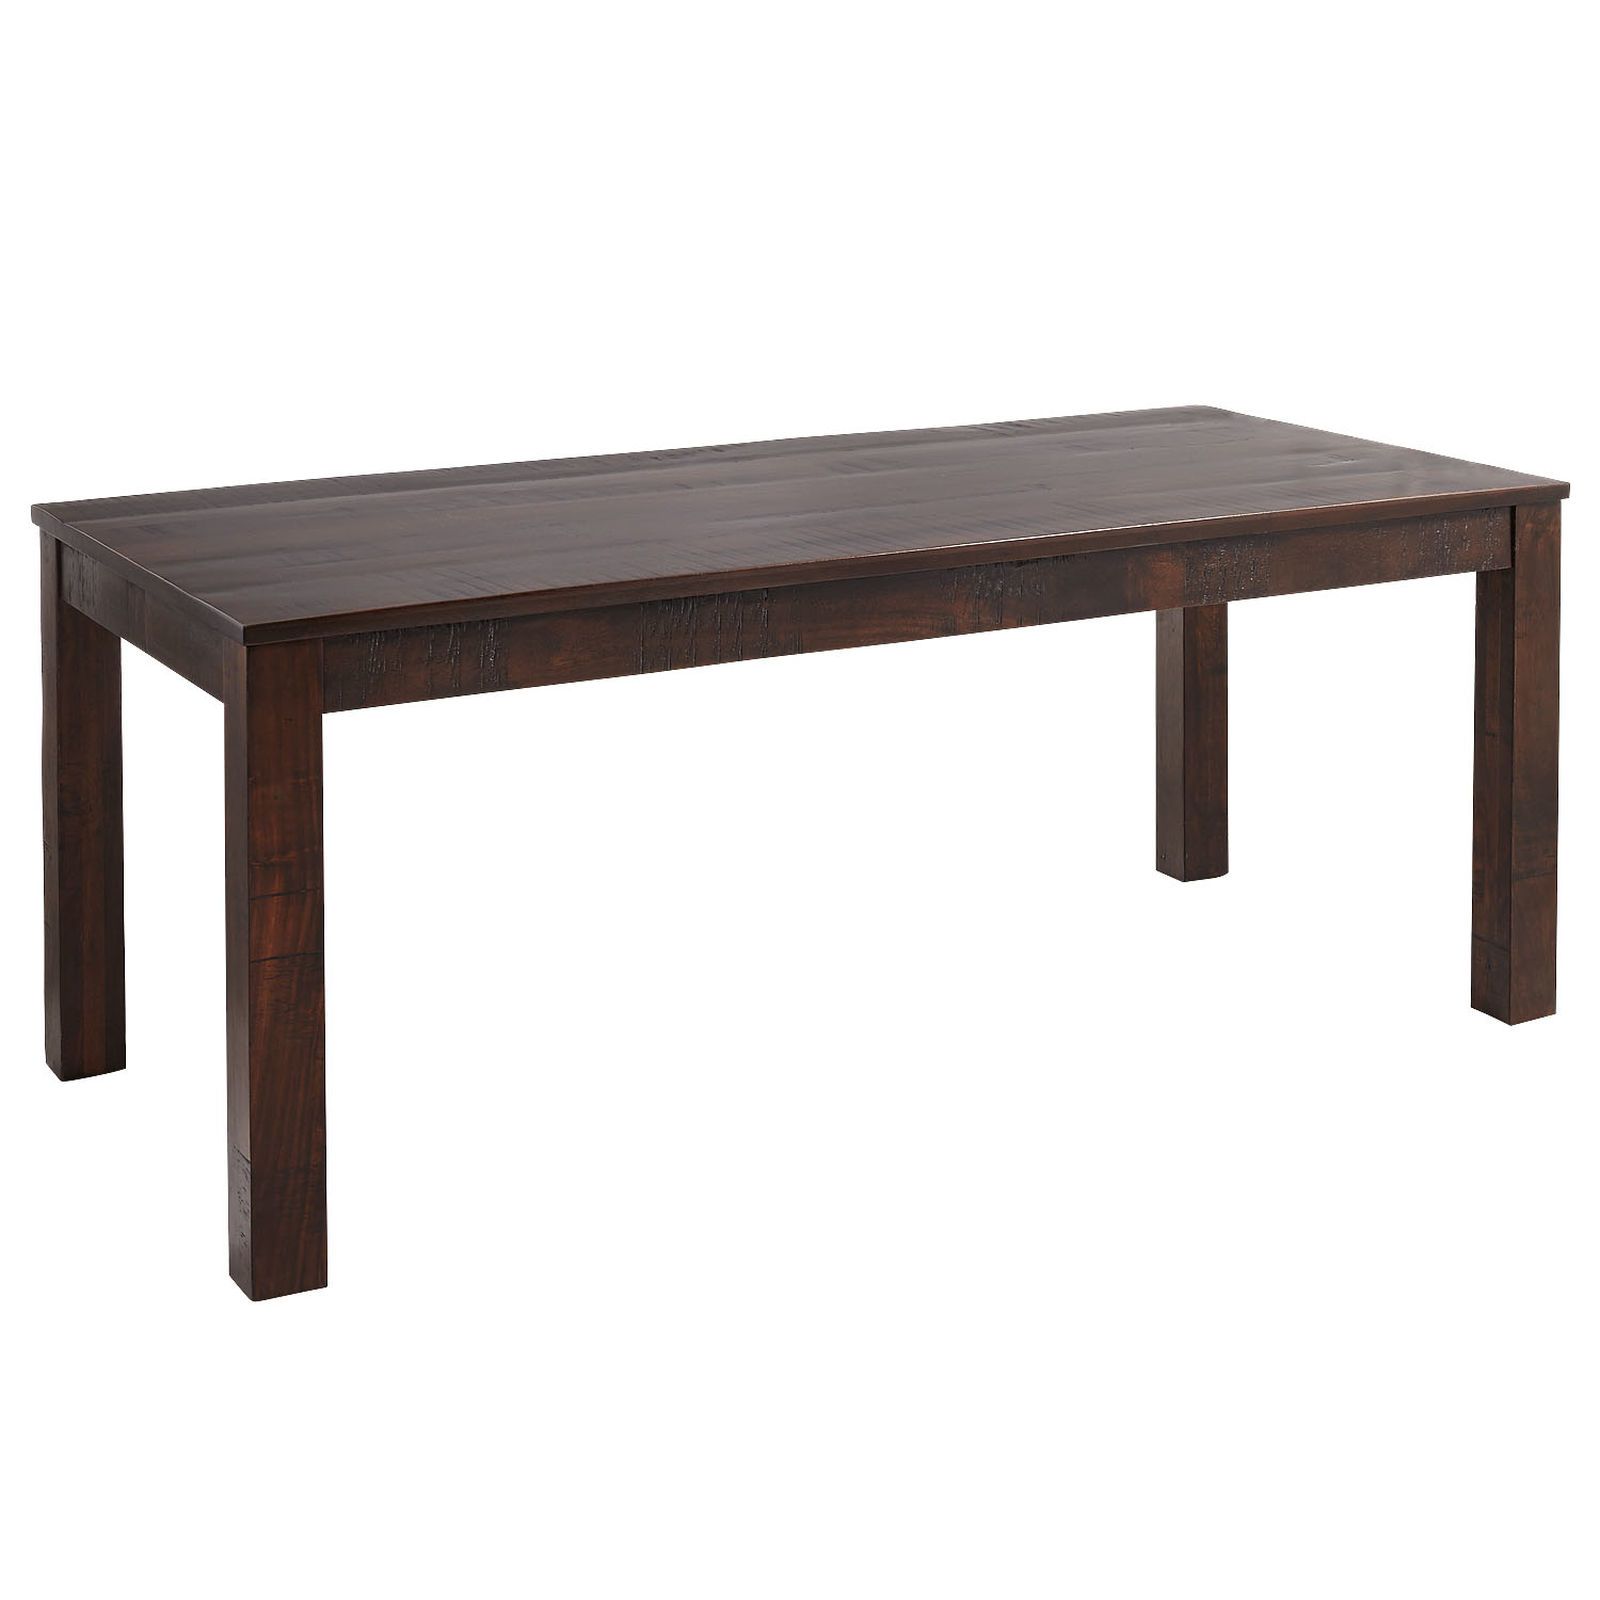 Parsons Tobacco Brown Dining Tables | Pier 1 Imports